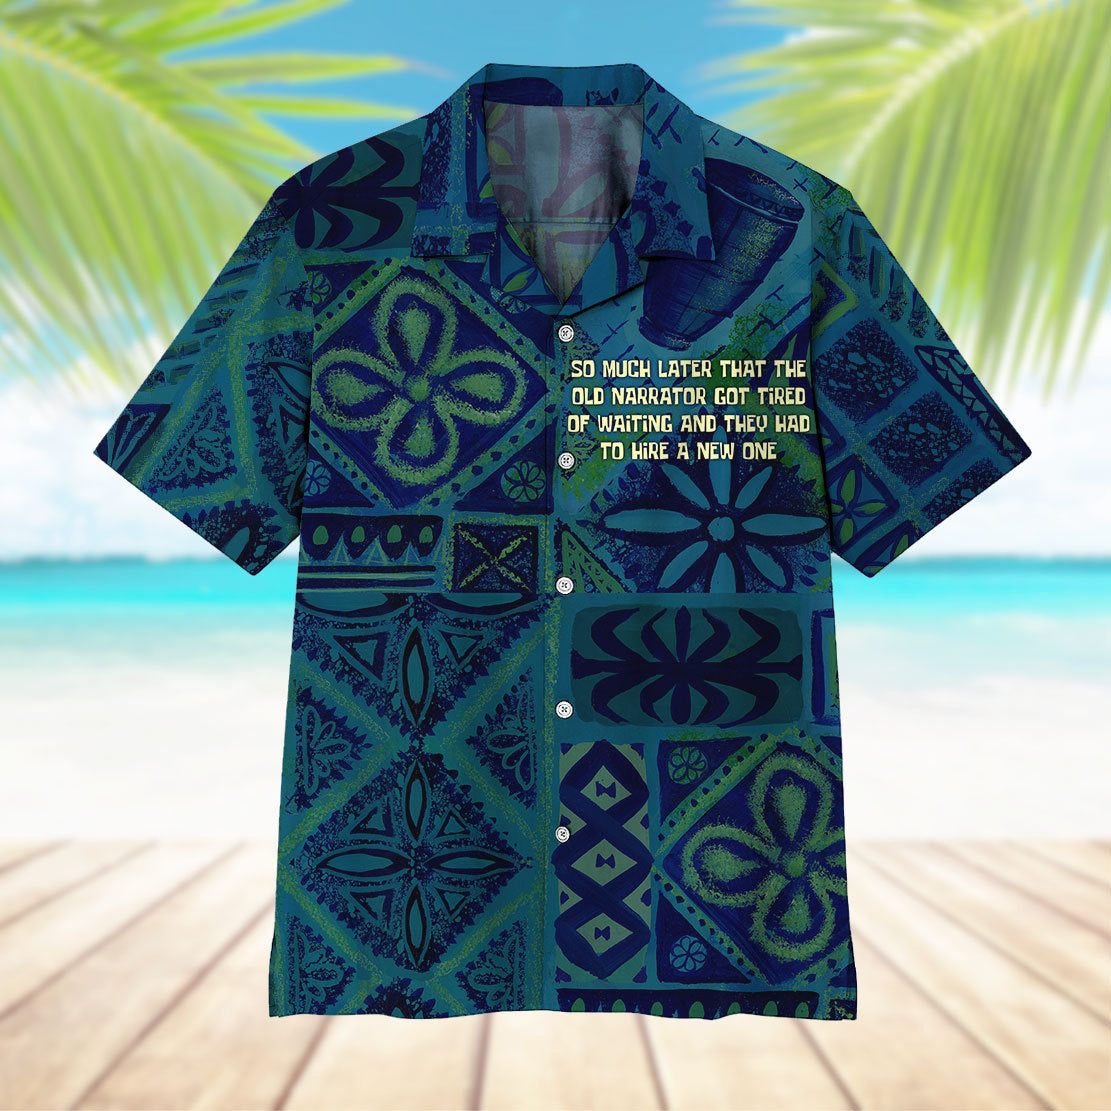 So Much Later That The Old Narrator Got Tired Of Waiting And They Had To Hire A New One Hawaii Shirt 11